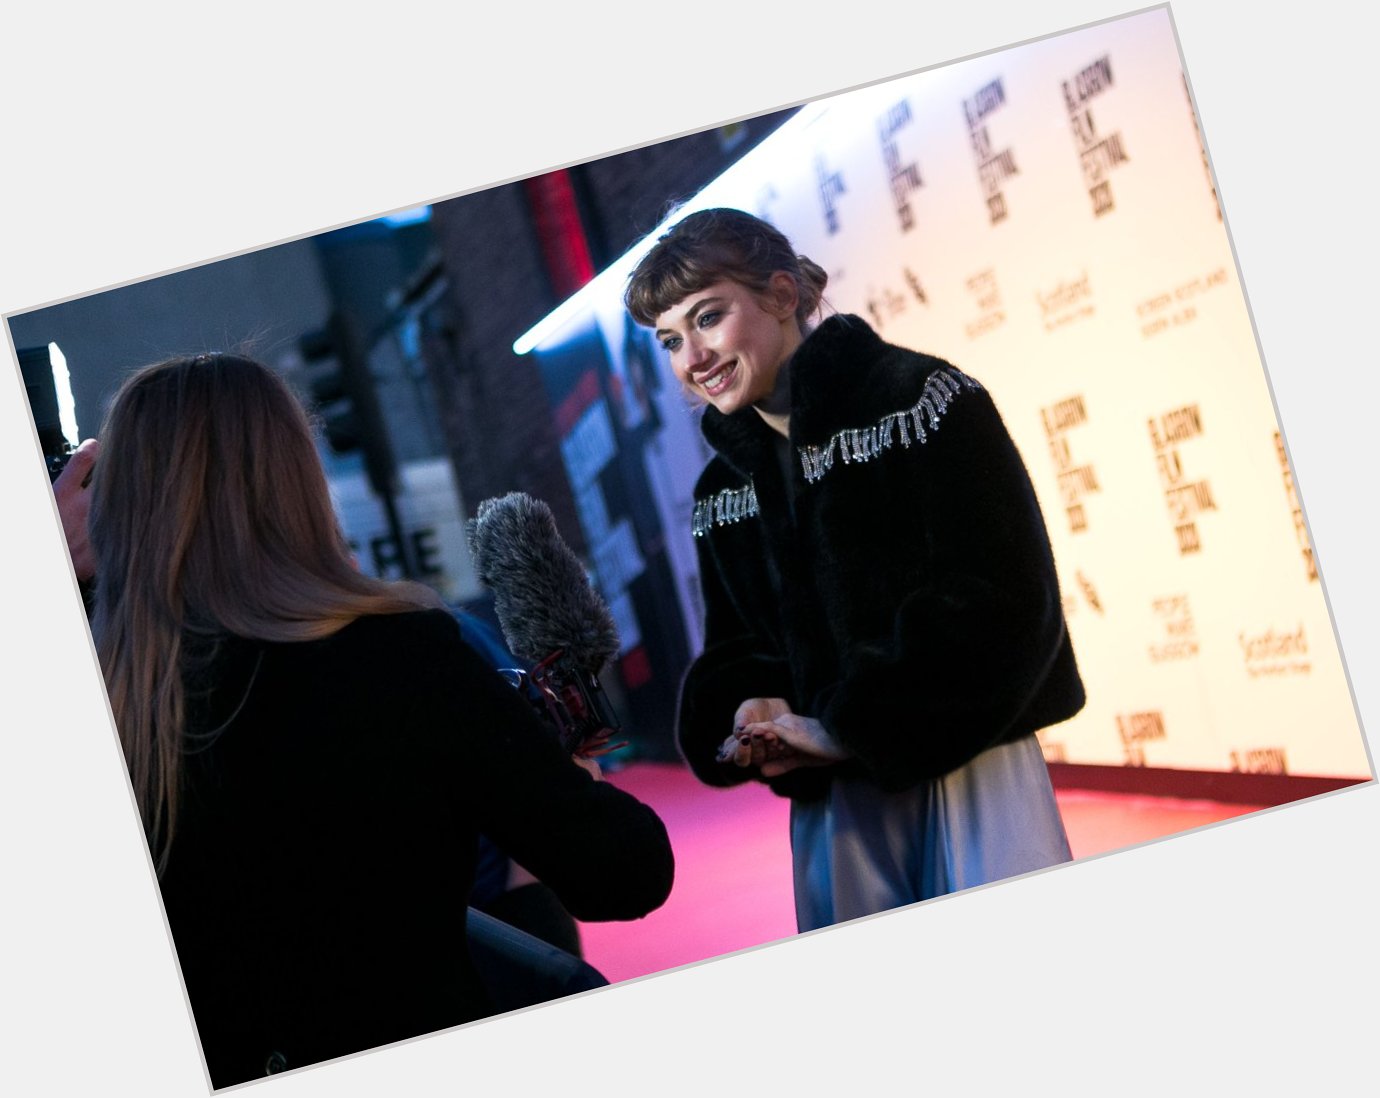 Wishing a very happy birthday to Imogen Poots, here on the red carpet for Vivarium back for 